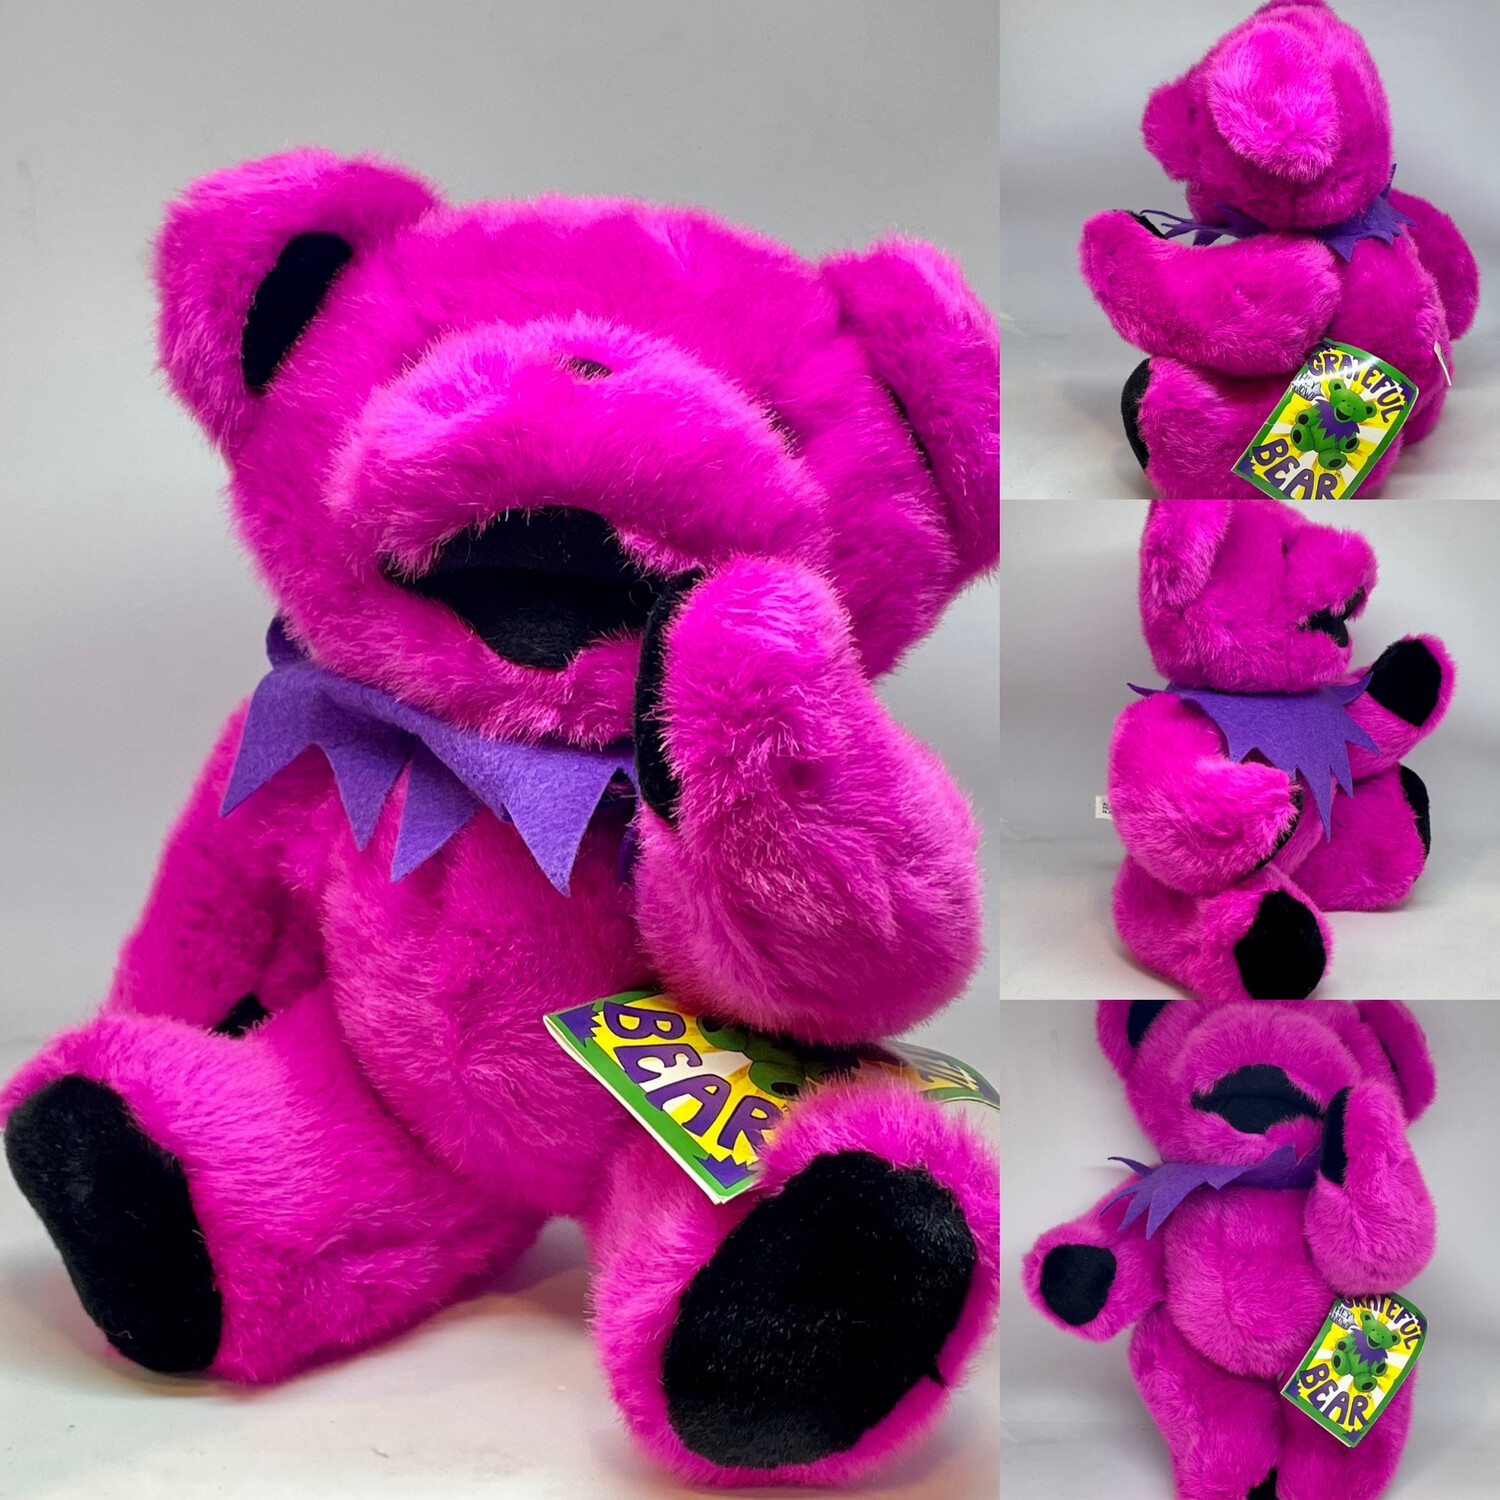 Vintage 1990 Grateful Dead Teddy Bear Pink With Articulating Limbs. New with Intact Tags